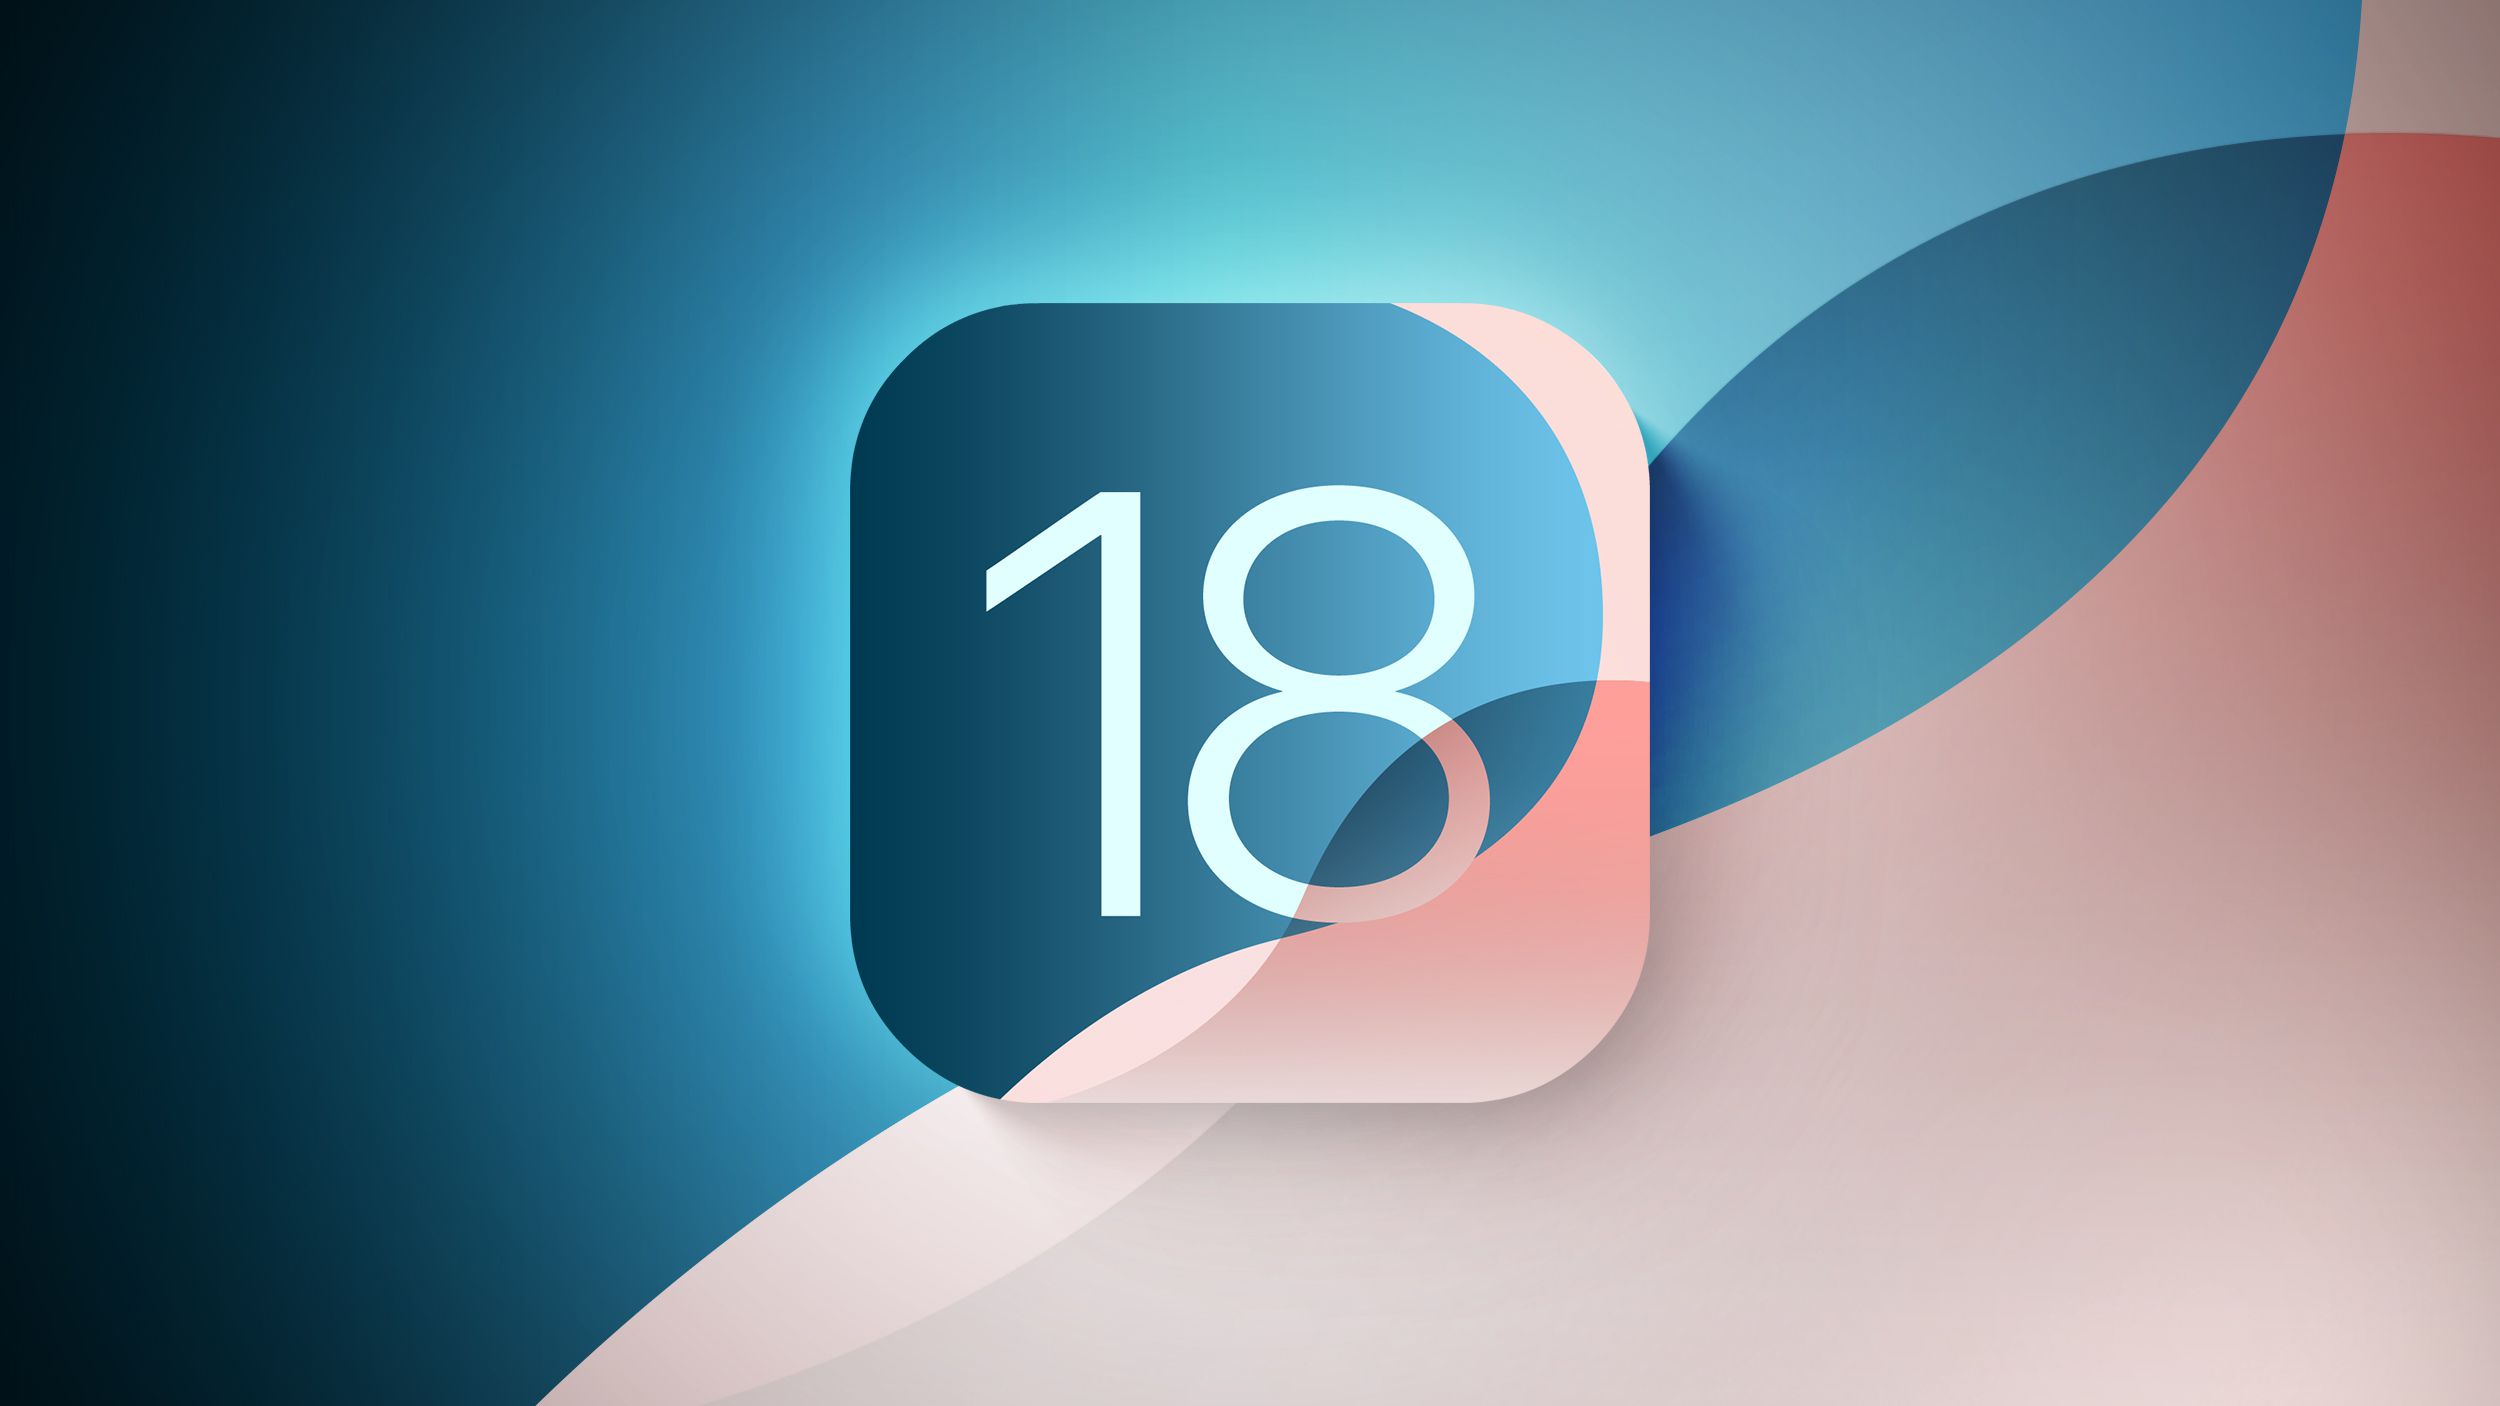 iOS 18: Features, Compatible Devices, Launch Date, and More